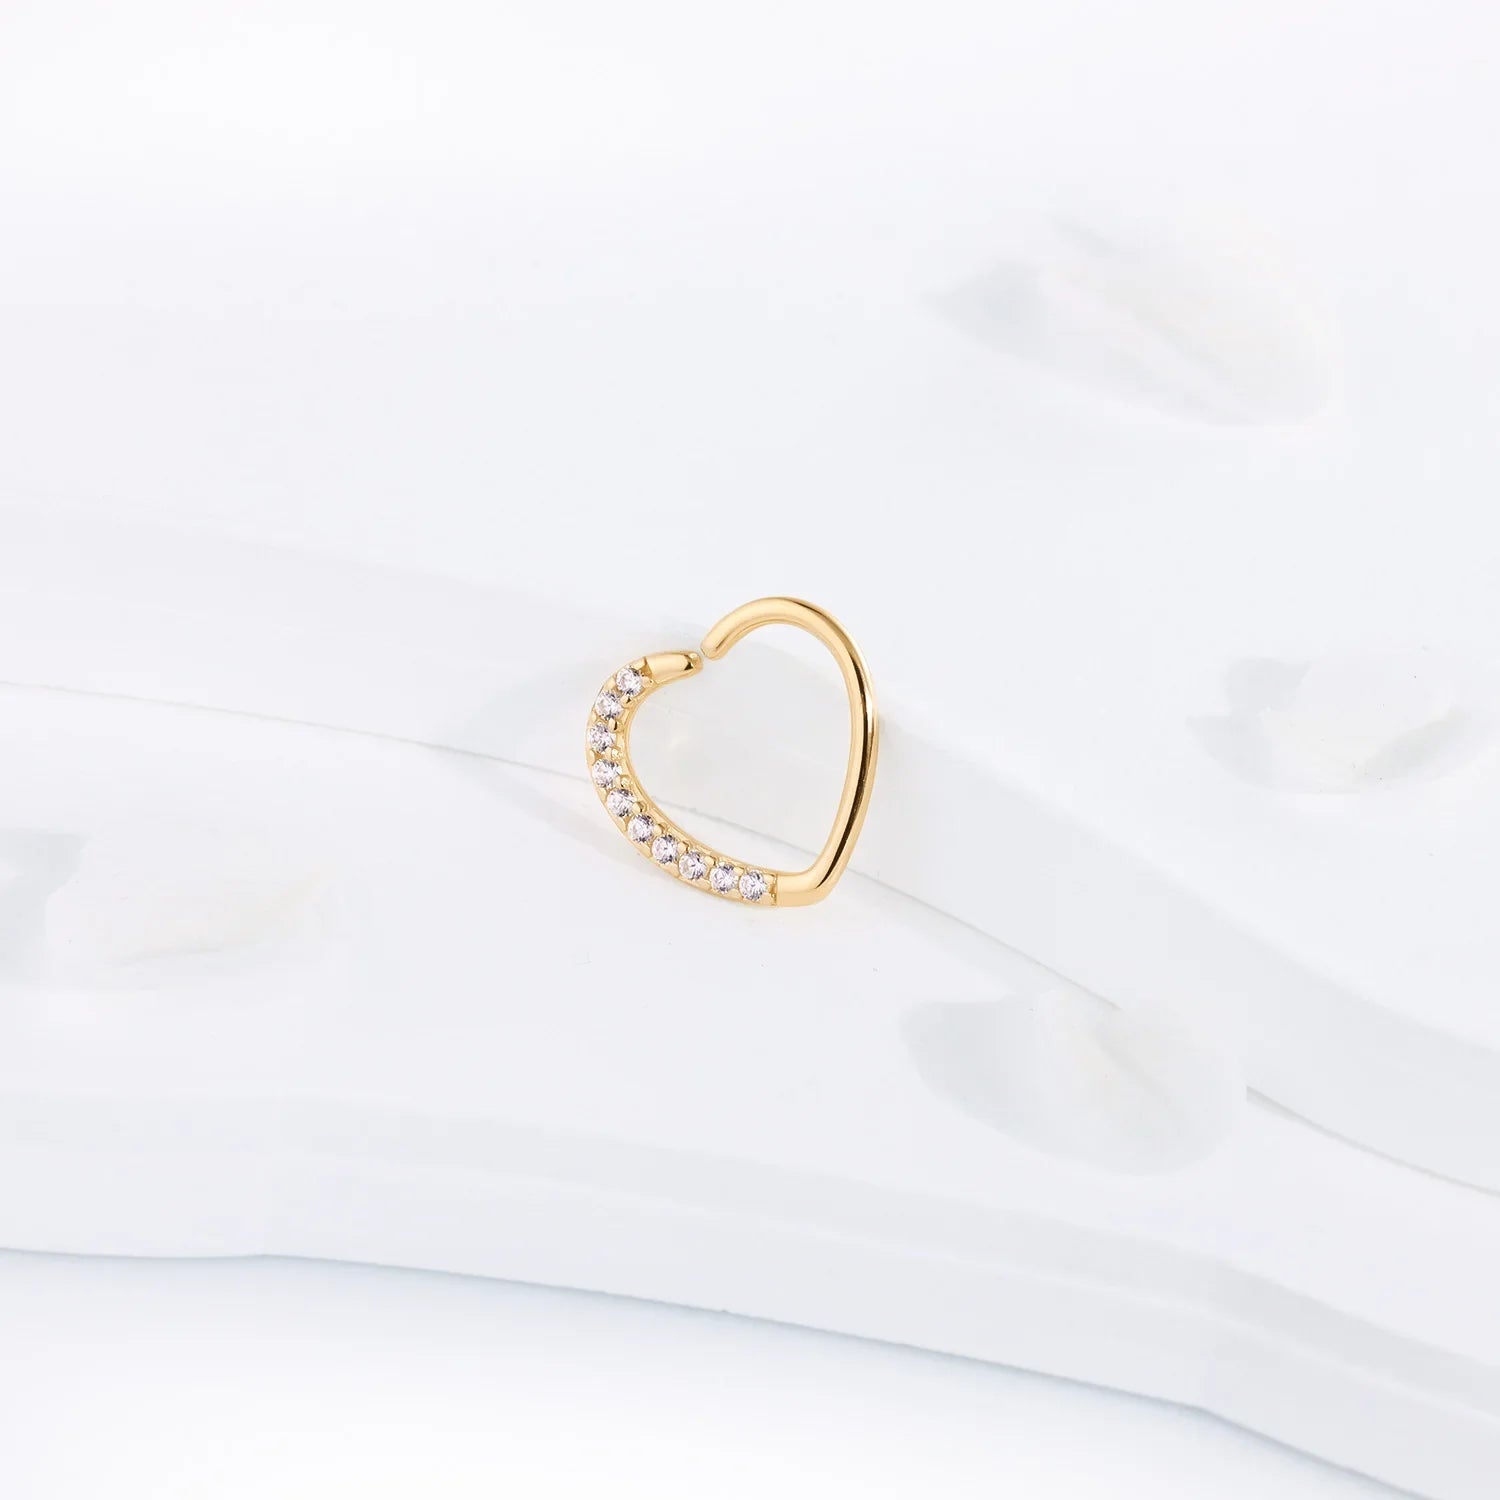 14k gold heart ring with diamonds daith earring with clear CZ stones solid gold Ashley Piercing Jewelry